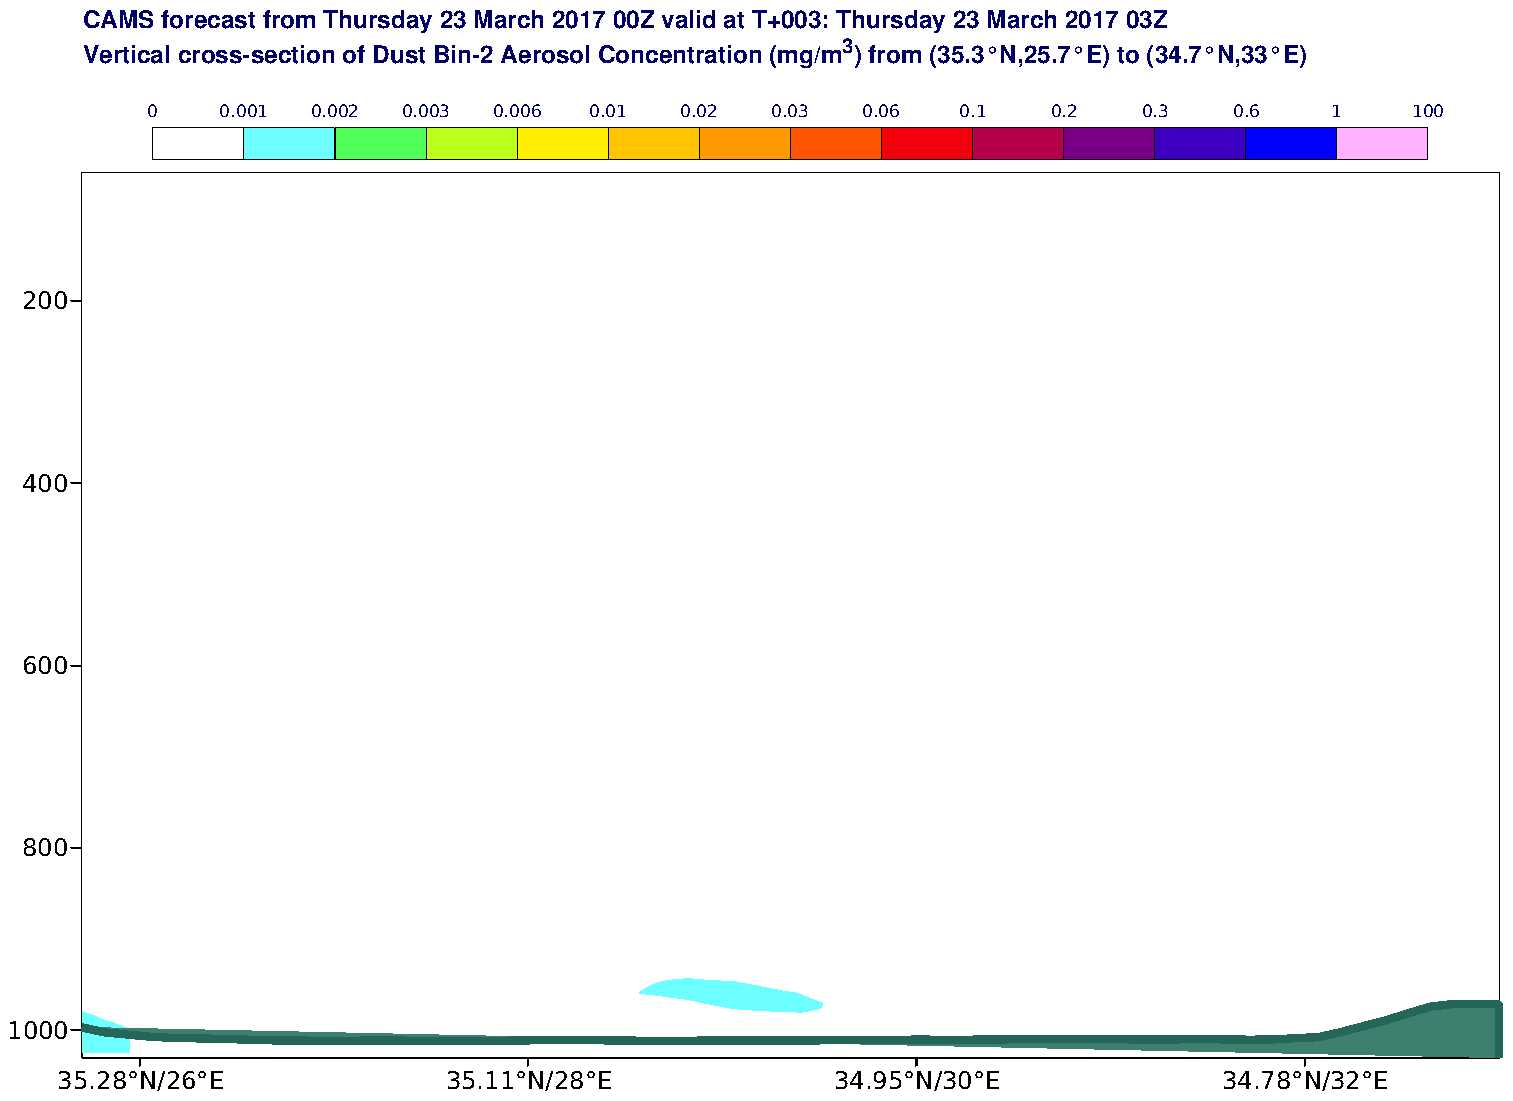 Vertical cross-section of Dust Bin-2 Aerosol Concentration (mg/m3) valid at T3 - 2017-03-23 03:00